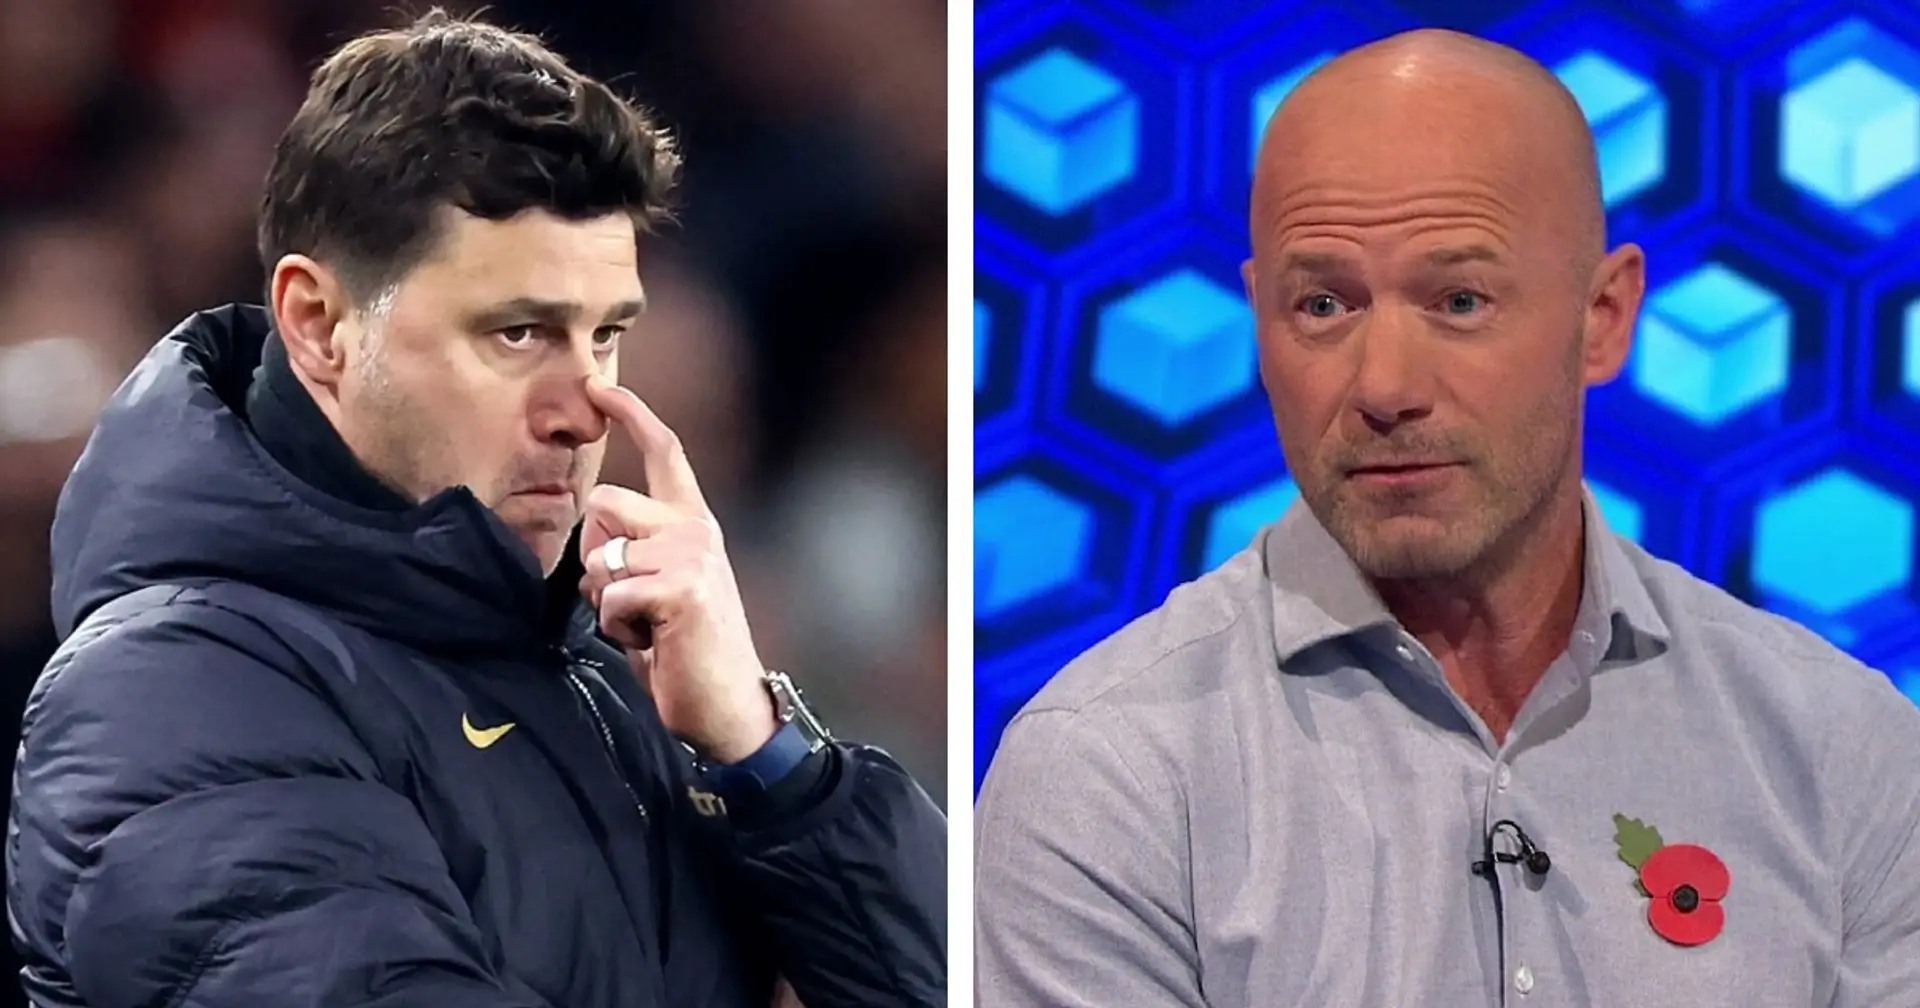 'He had to take a lot of s*** this season': Shearer says Pochettino could help Chelsea finish a 'bloody good season'